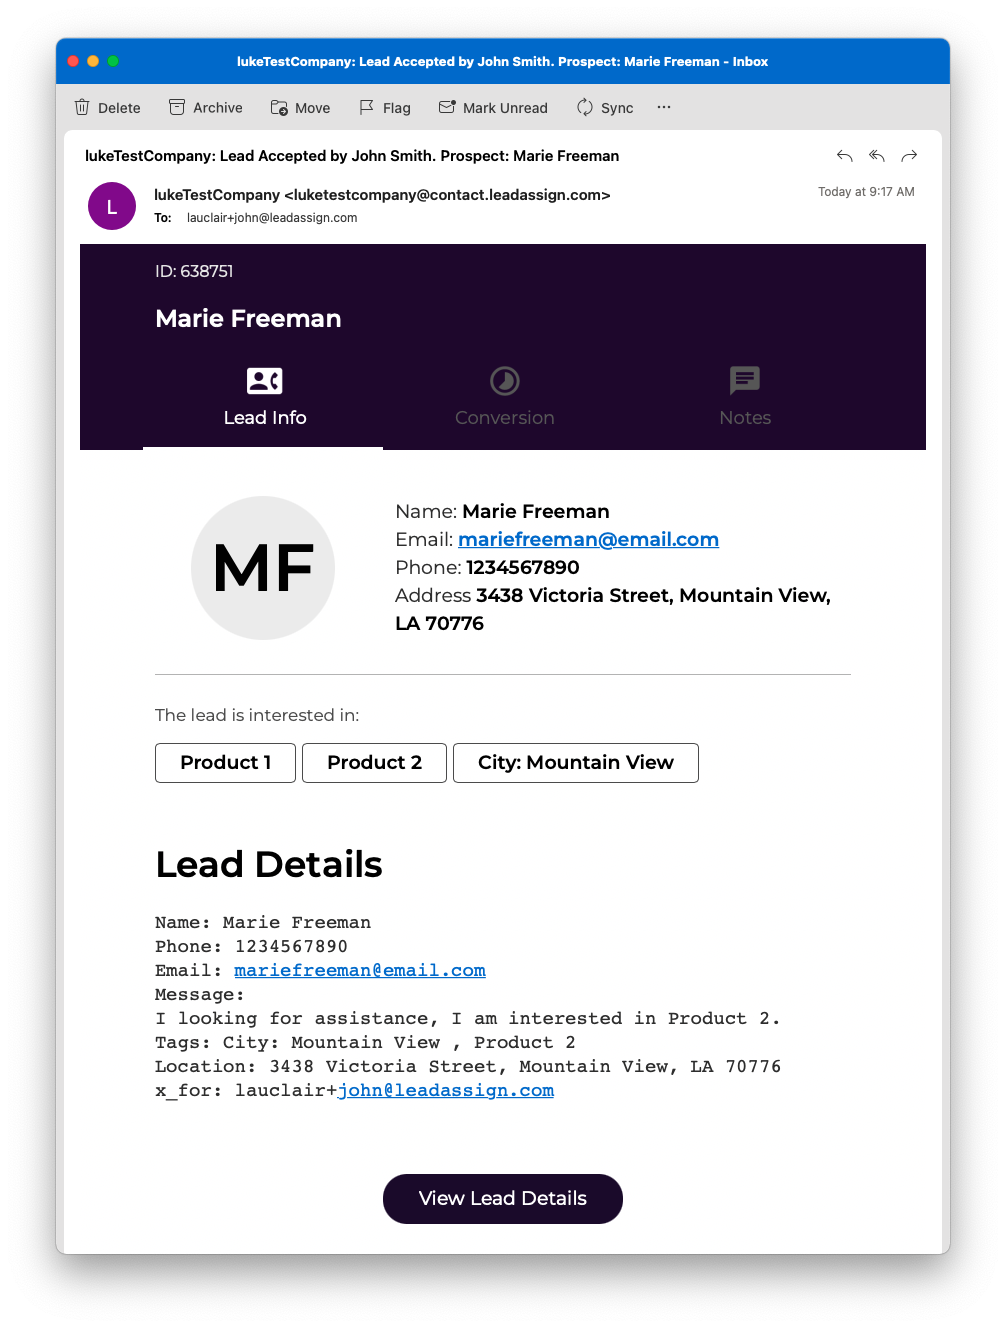 Lead Details - Email